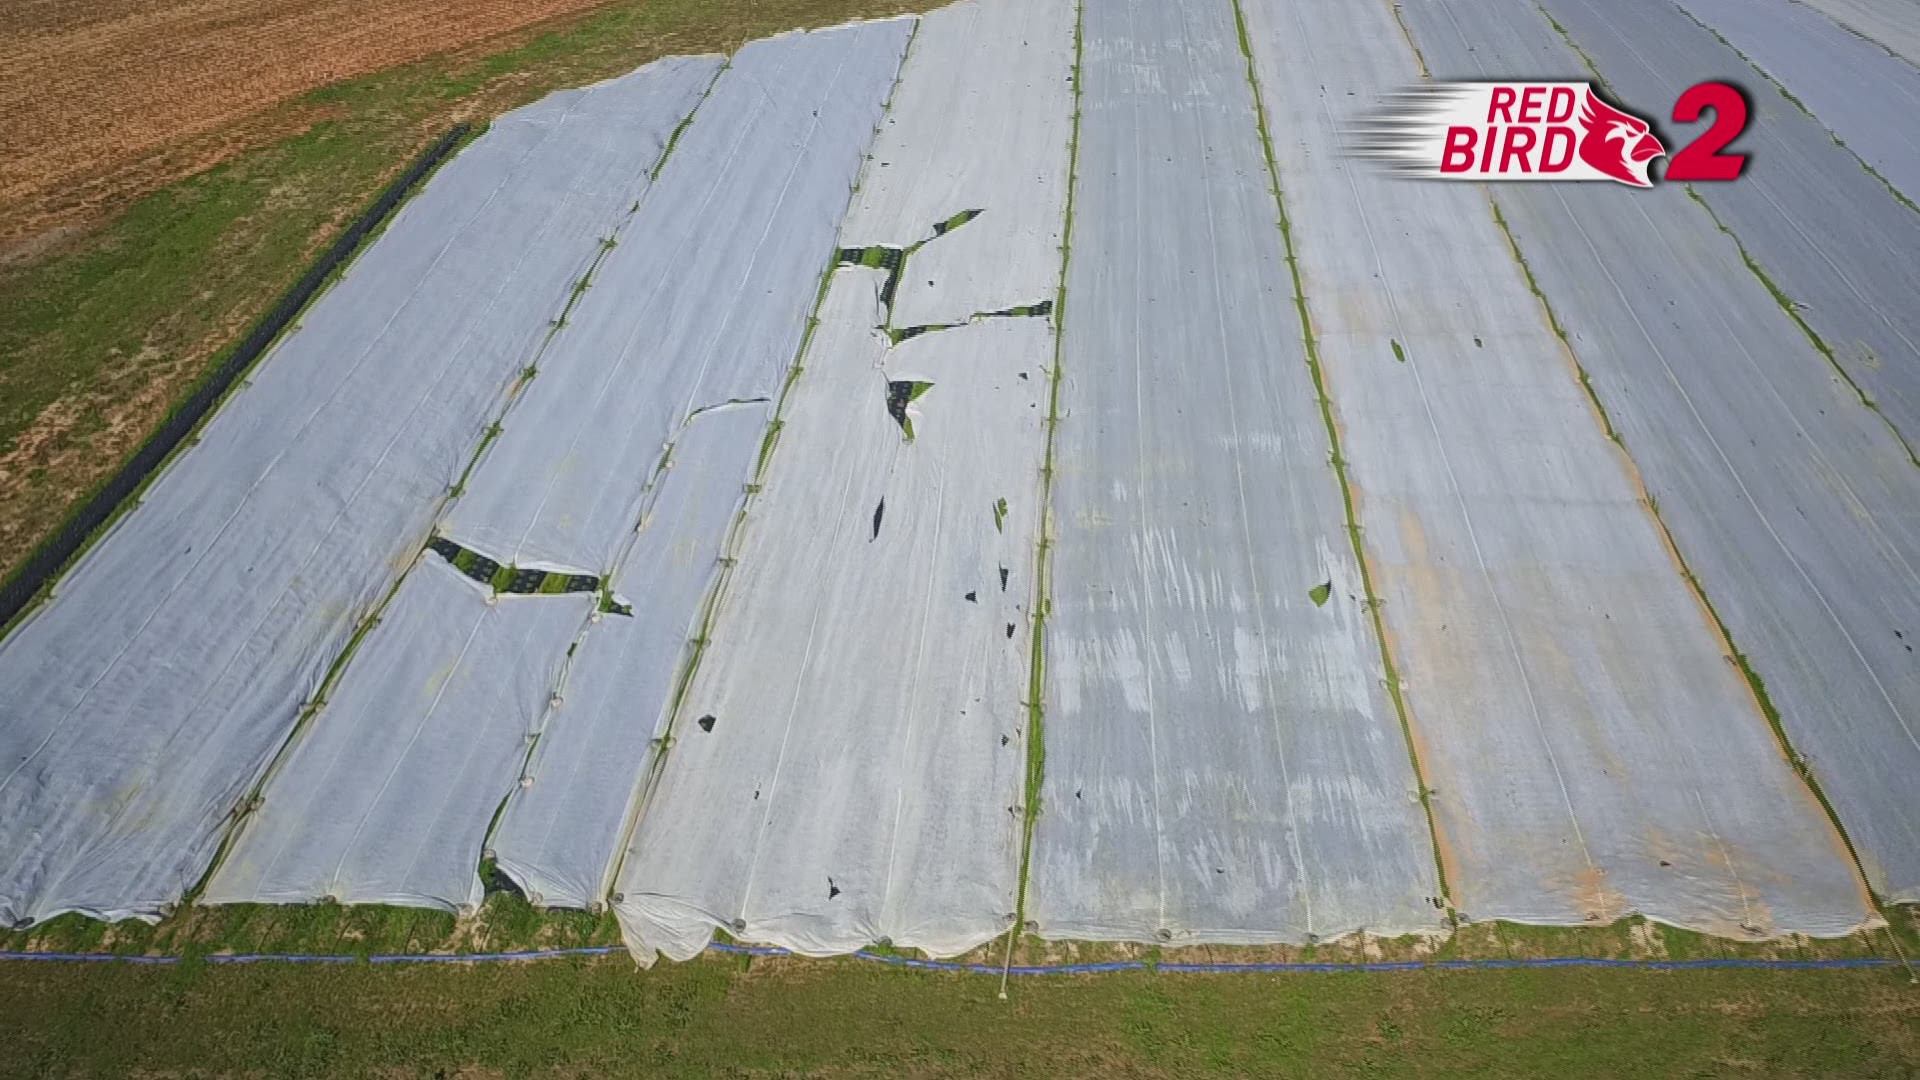 The strawberries at Rudd Farm in Greensboro have been blanketed to keep them protected during a cold snap.